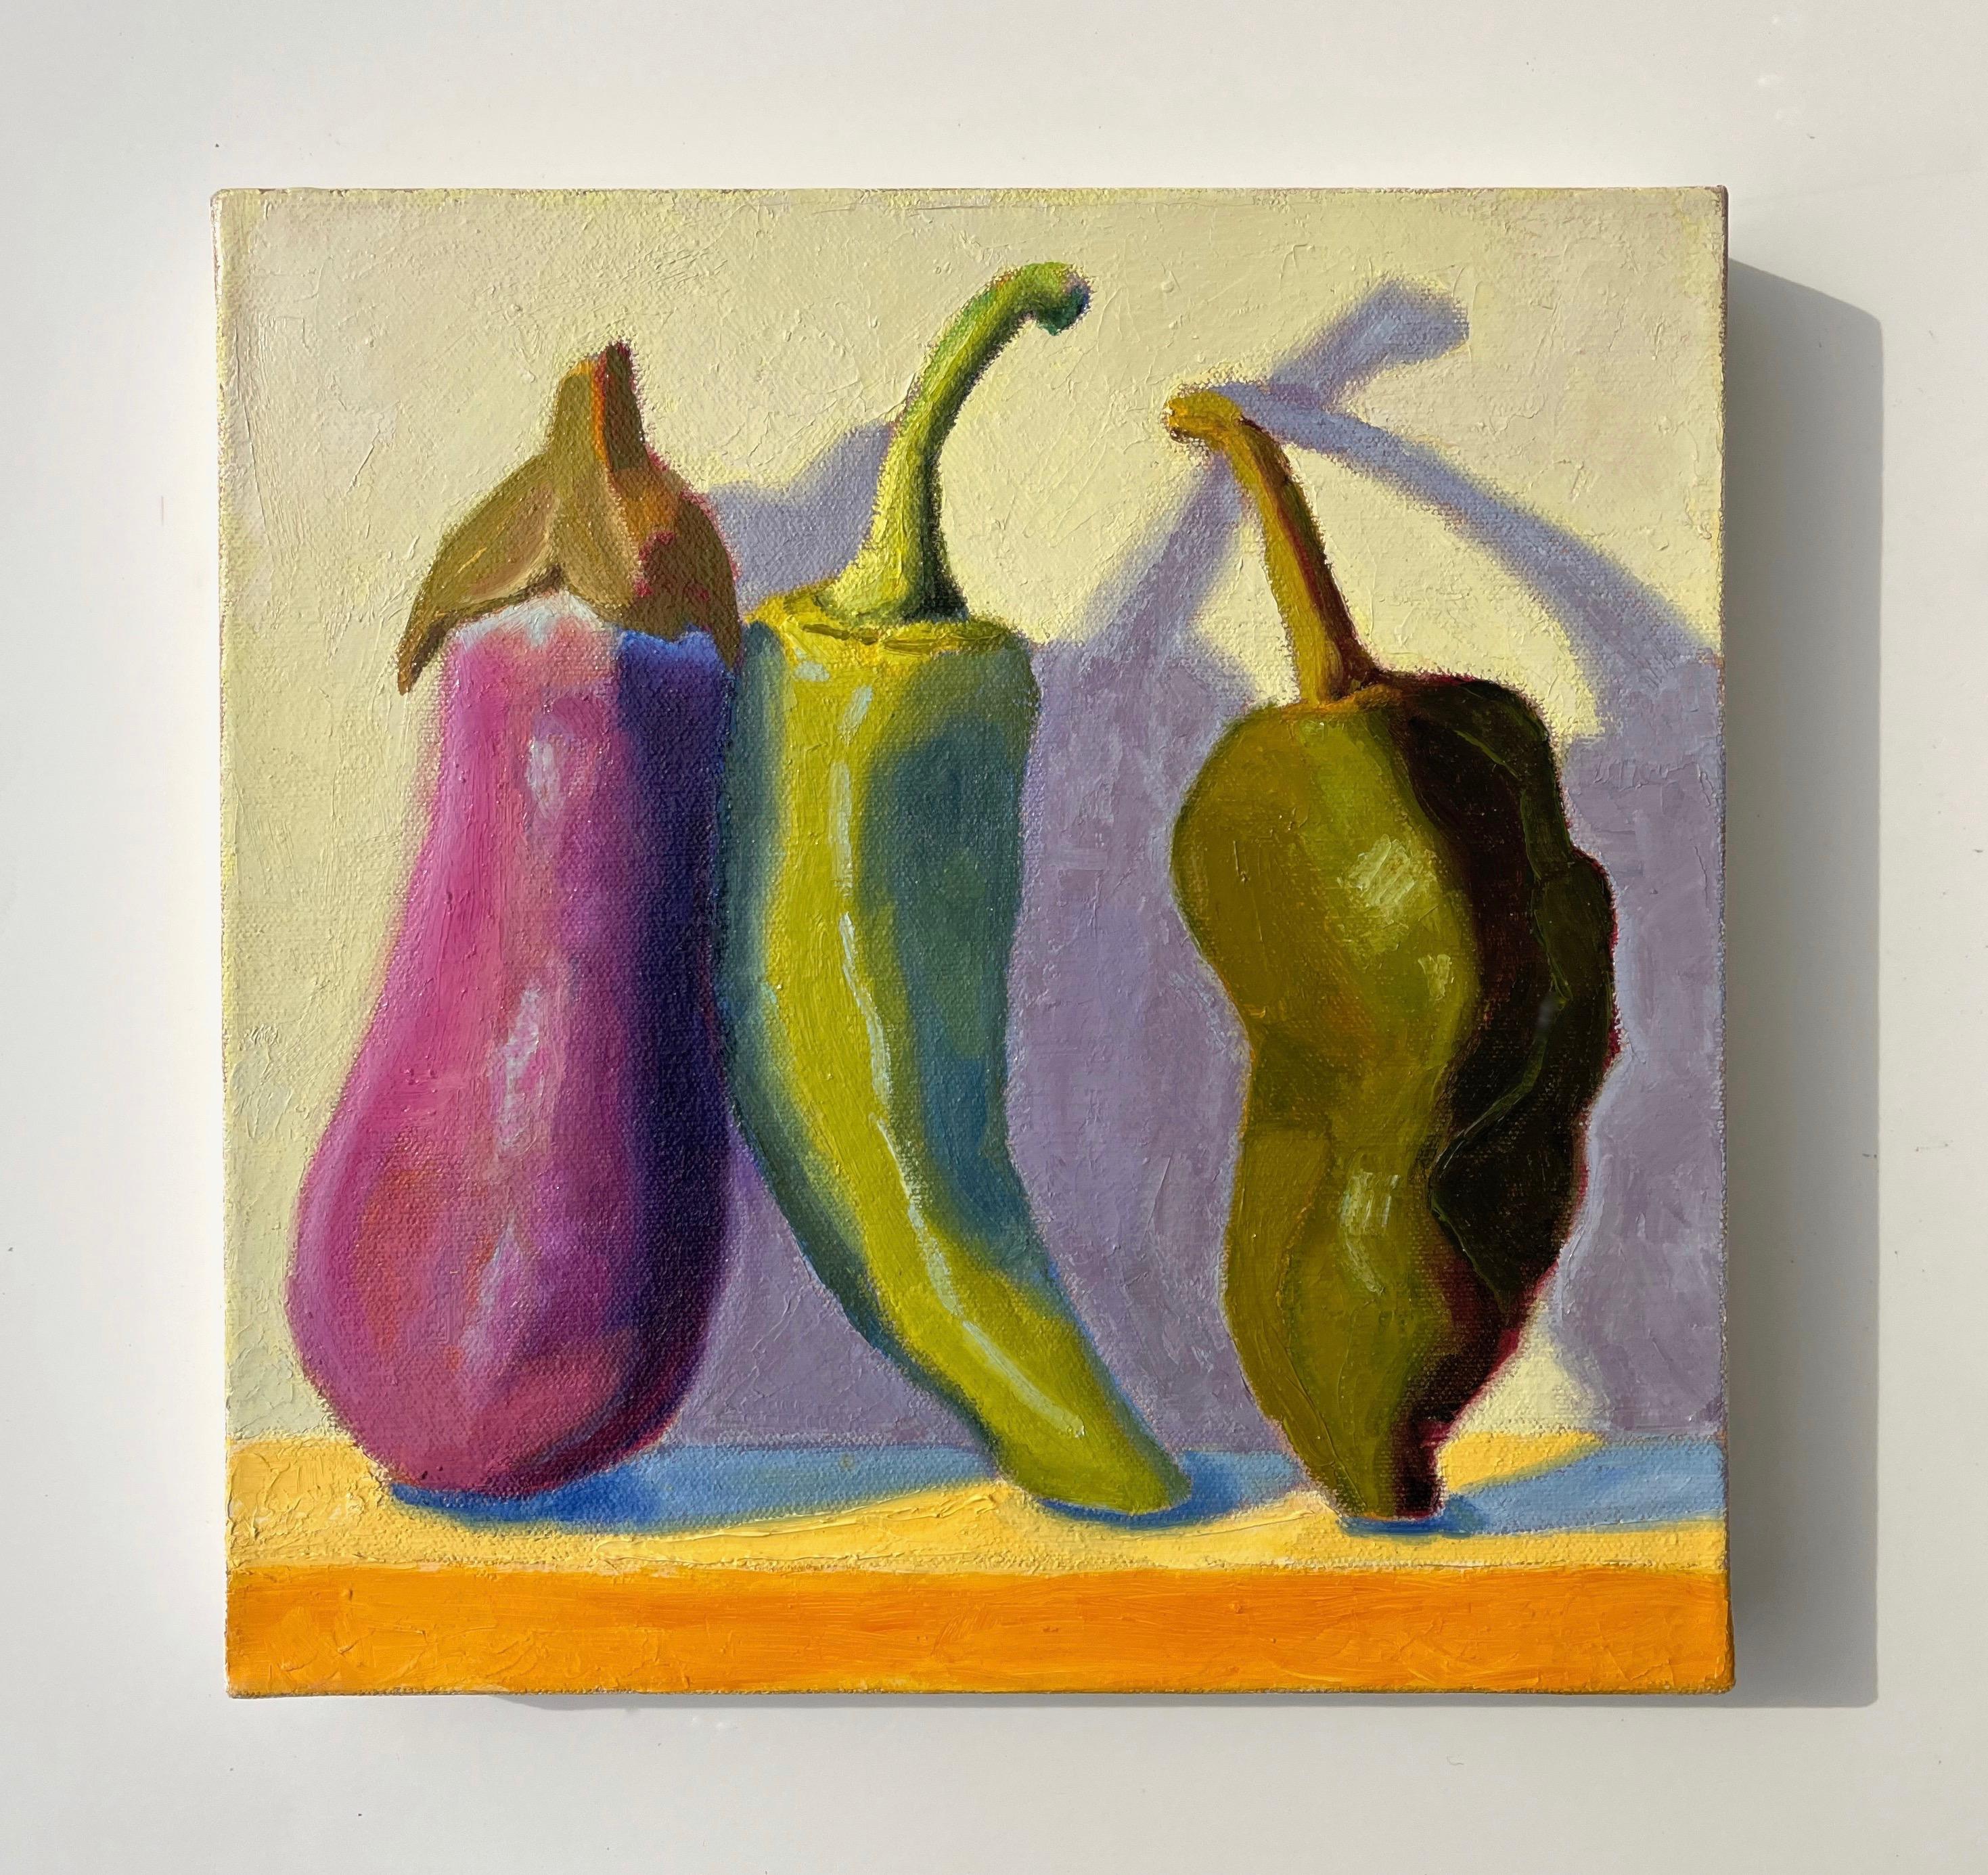 <p>Artist Comments<br>Artist Pat Doherty presents a still life of an eggplant, jalapeno pepper, and poblano chili pepper propped up on a shelf. This whimsical painting focuses on a balanced composition and strong color relationships while